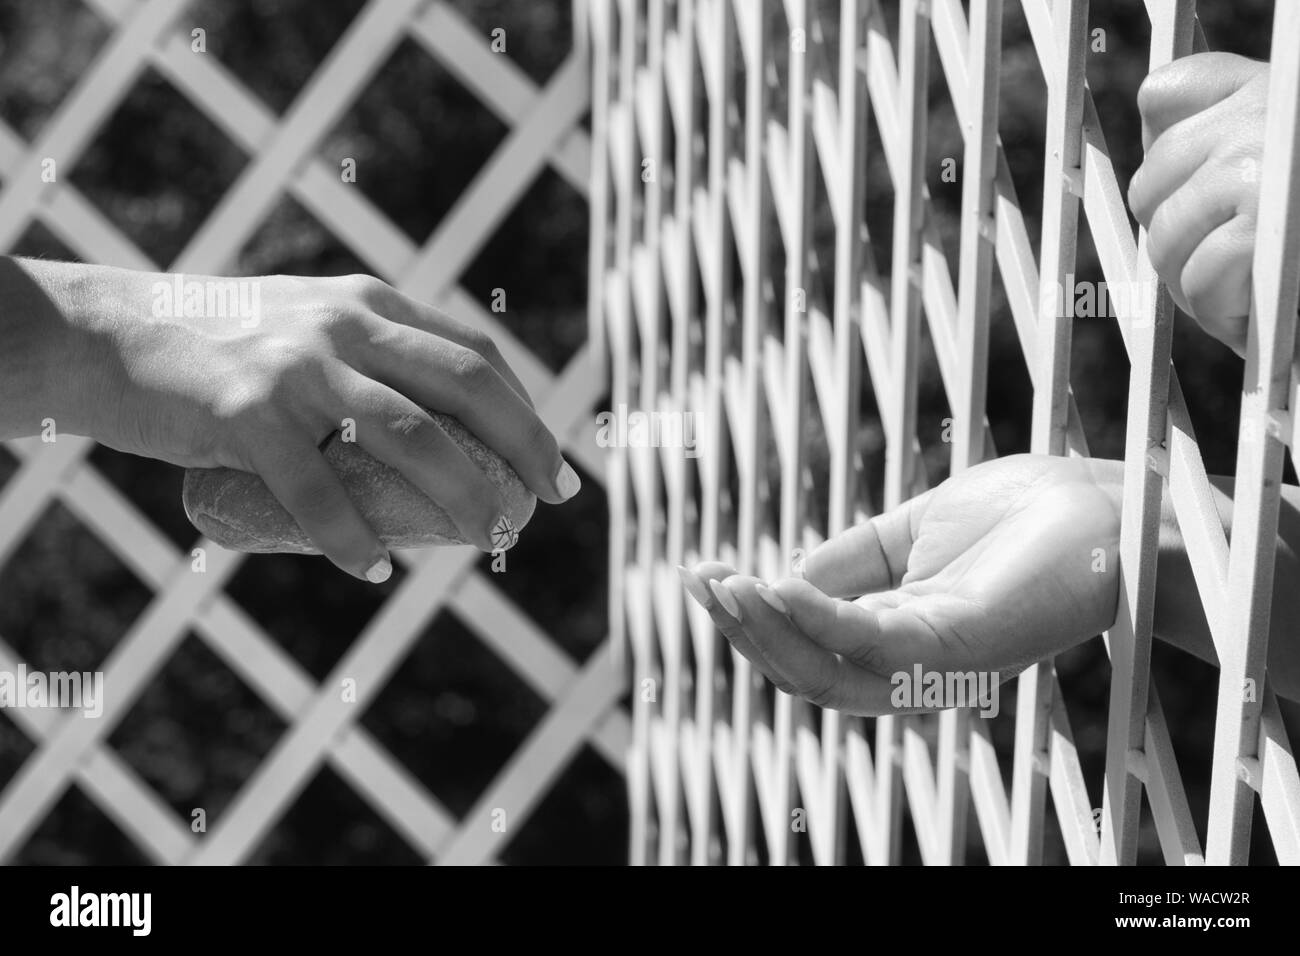 Hand on bars. Exchange of things trought bars. Social problems. Prision issue. Stock Photo